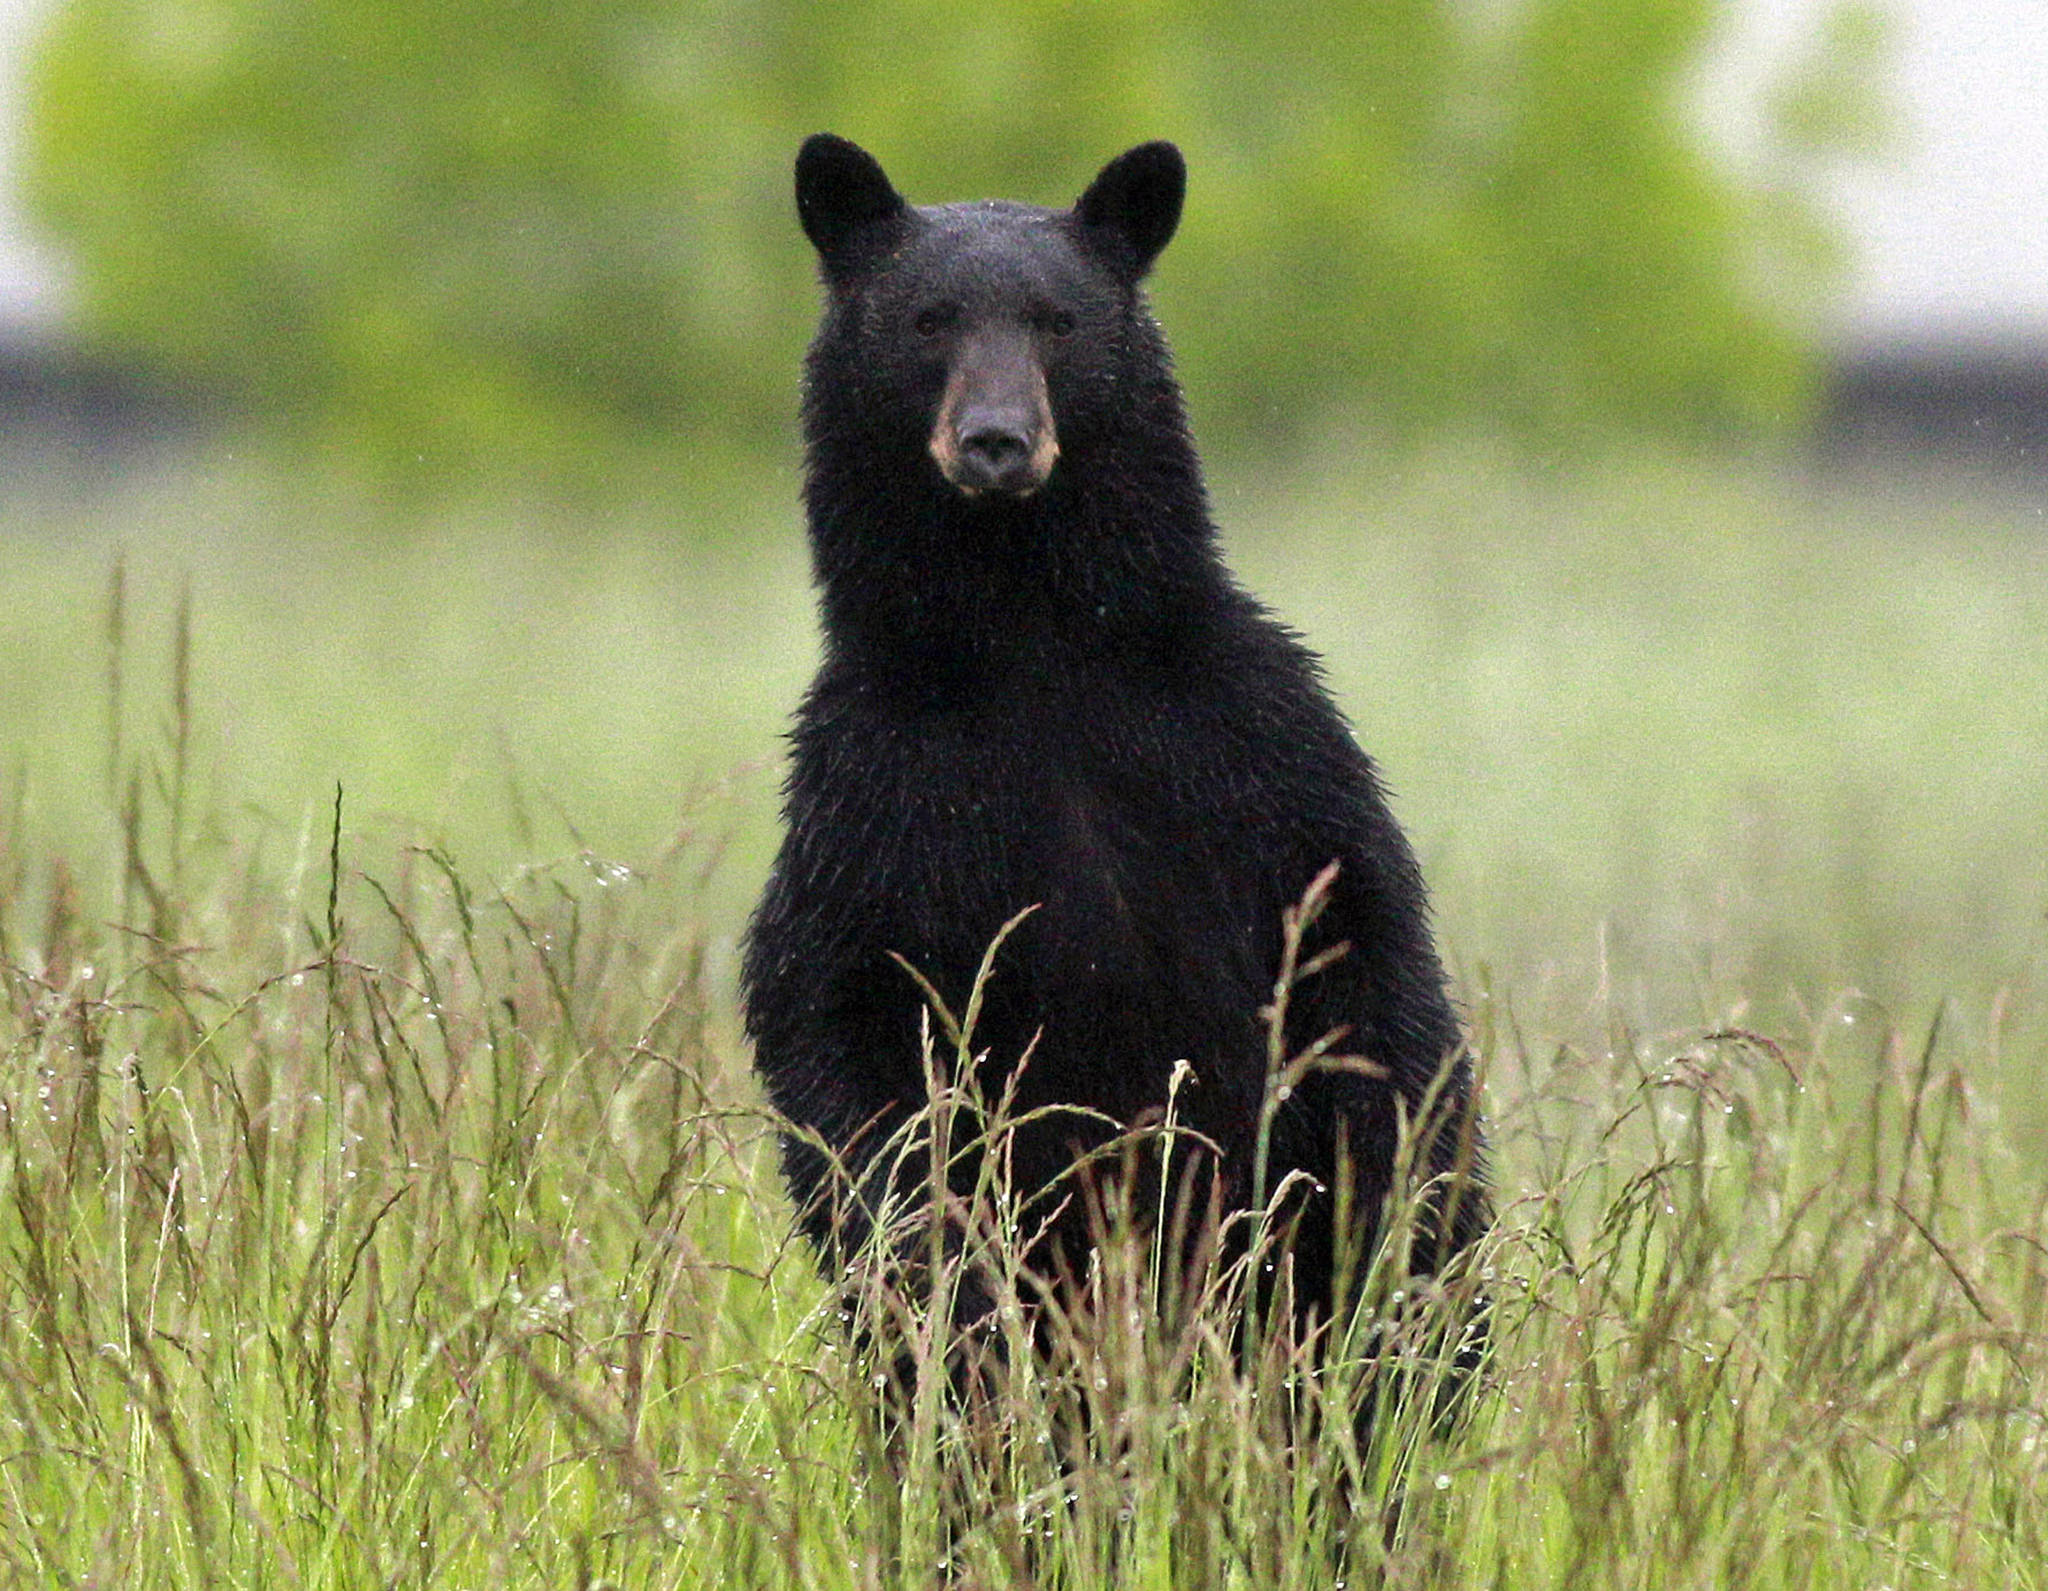 An adult black bear looks over the tall grass near the Tualatin Elementary School in Tualatin, Ore., in June 2011. (Rick Bowmer/The Associated Press)